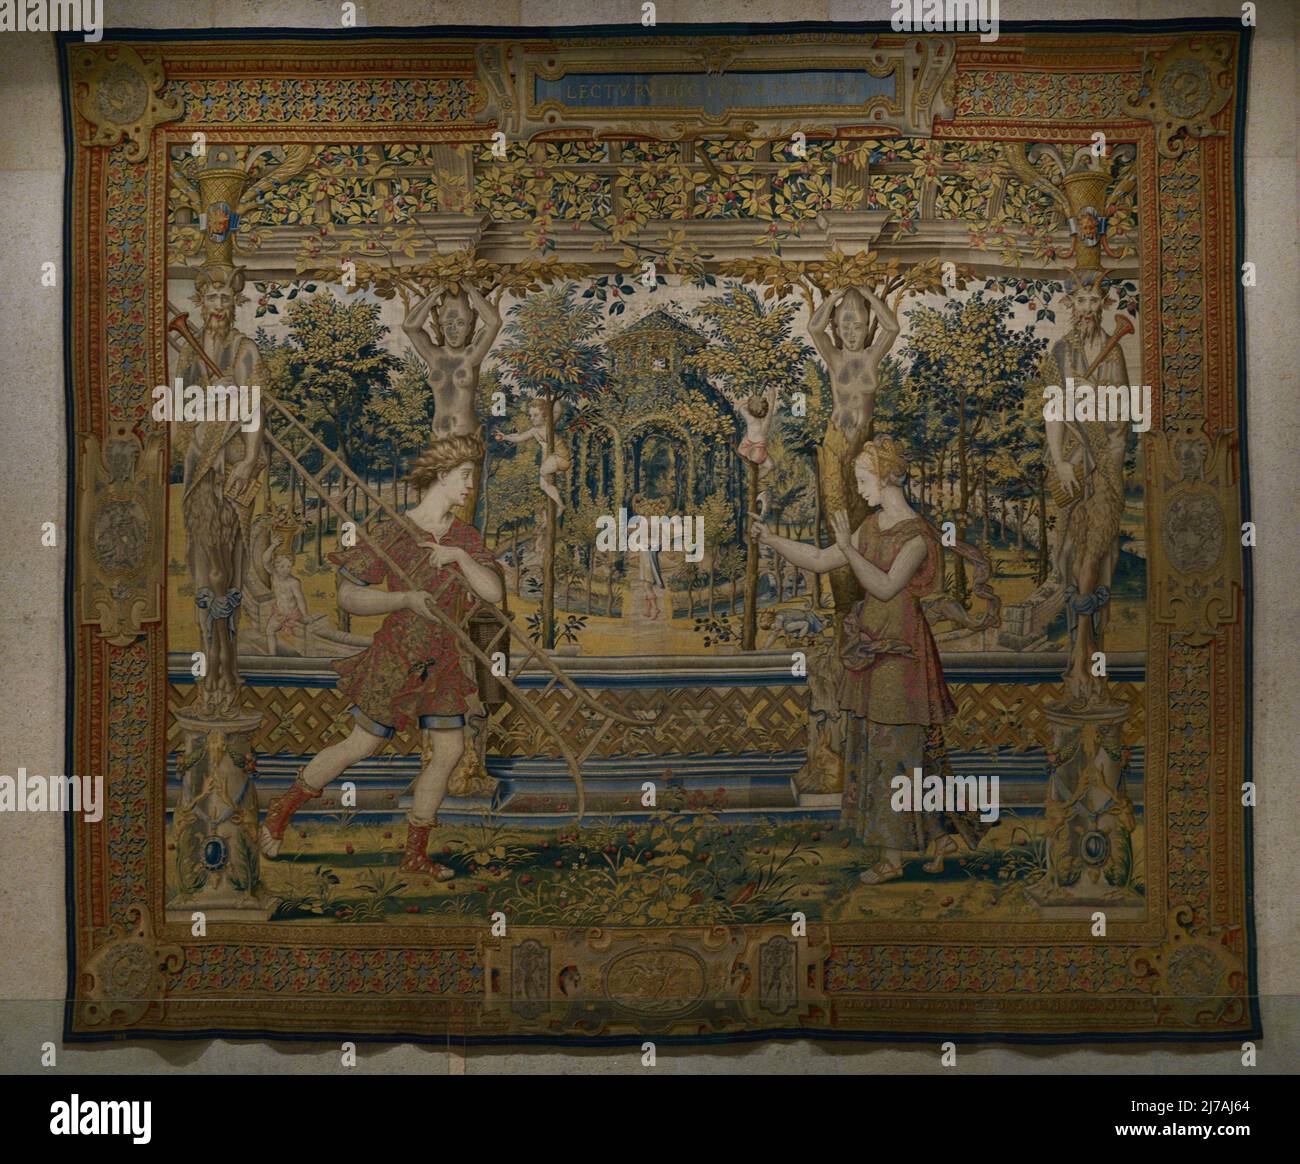 Vertumnus and Pomona. Tapestry belonging to the the set 'History of Vertumnus and Pomona', based on cartoons attributed to the Flemish artist Pieter Coecke van Aelst (1502-1550). Flanders, mid-16th century. Wool, silk and gold thread. Calouste Gulbenkian Museum. Lisbon, Portugal. Stock Photo